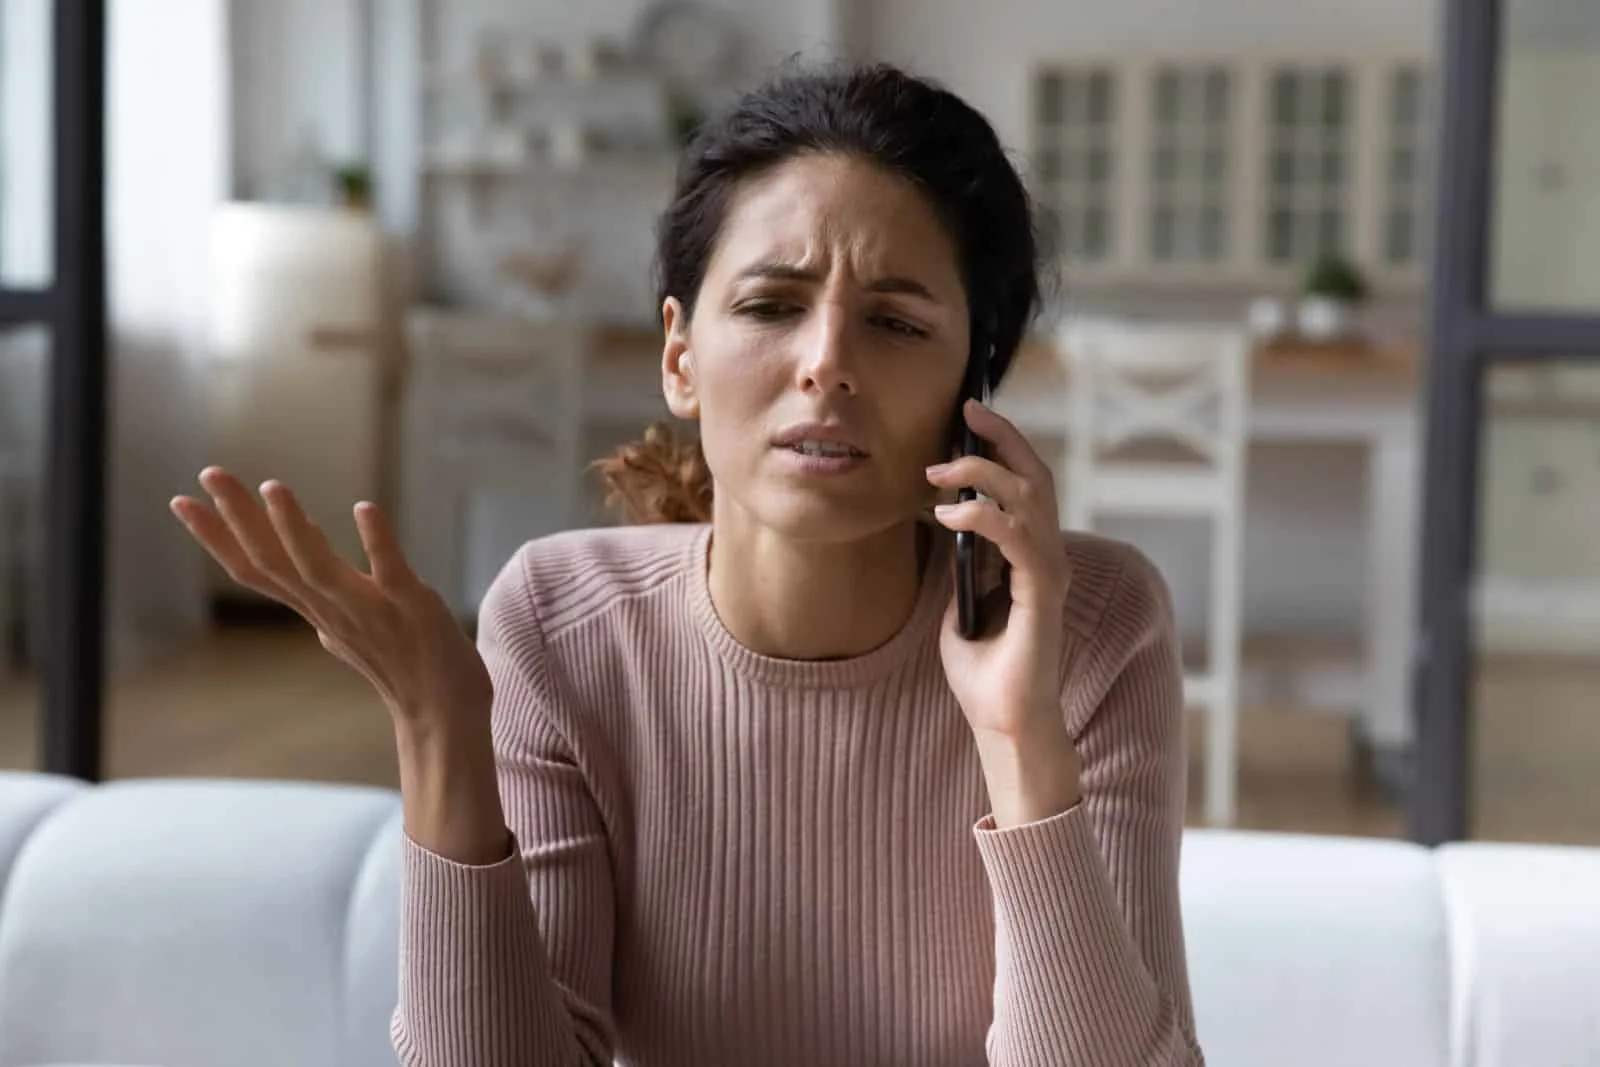 woman in a bad mood talking on the phone